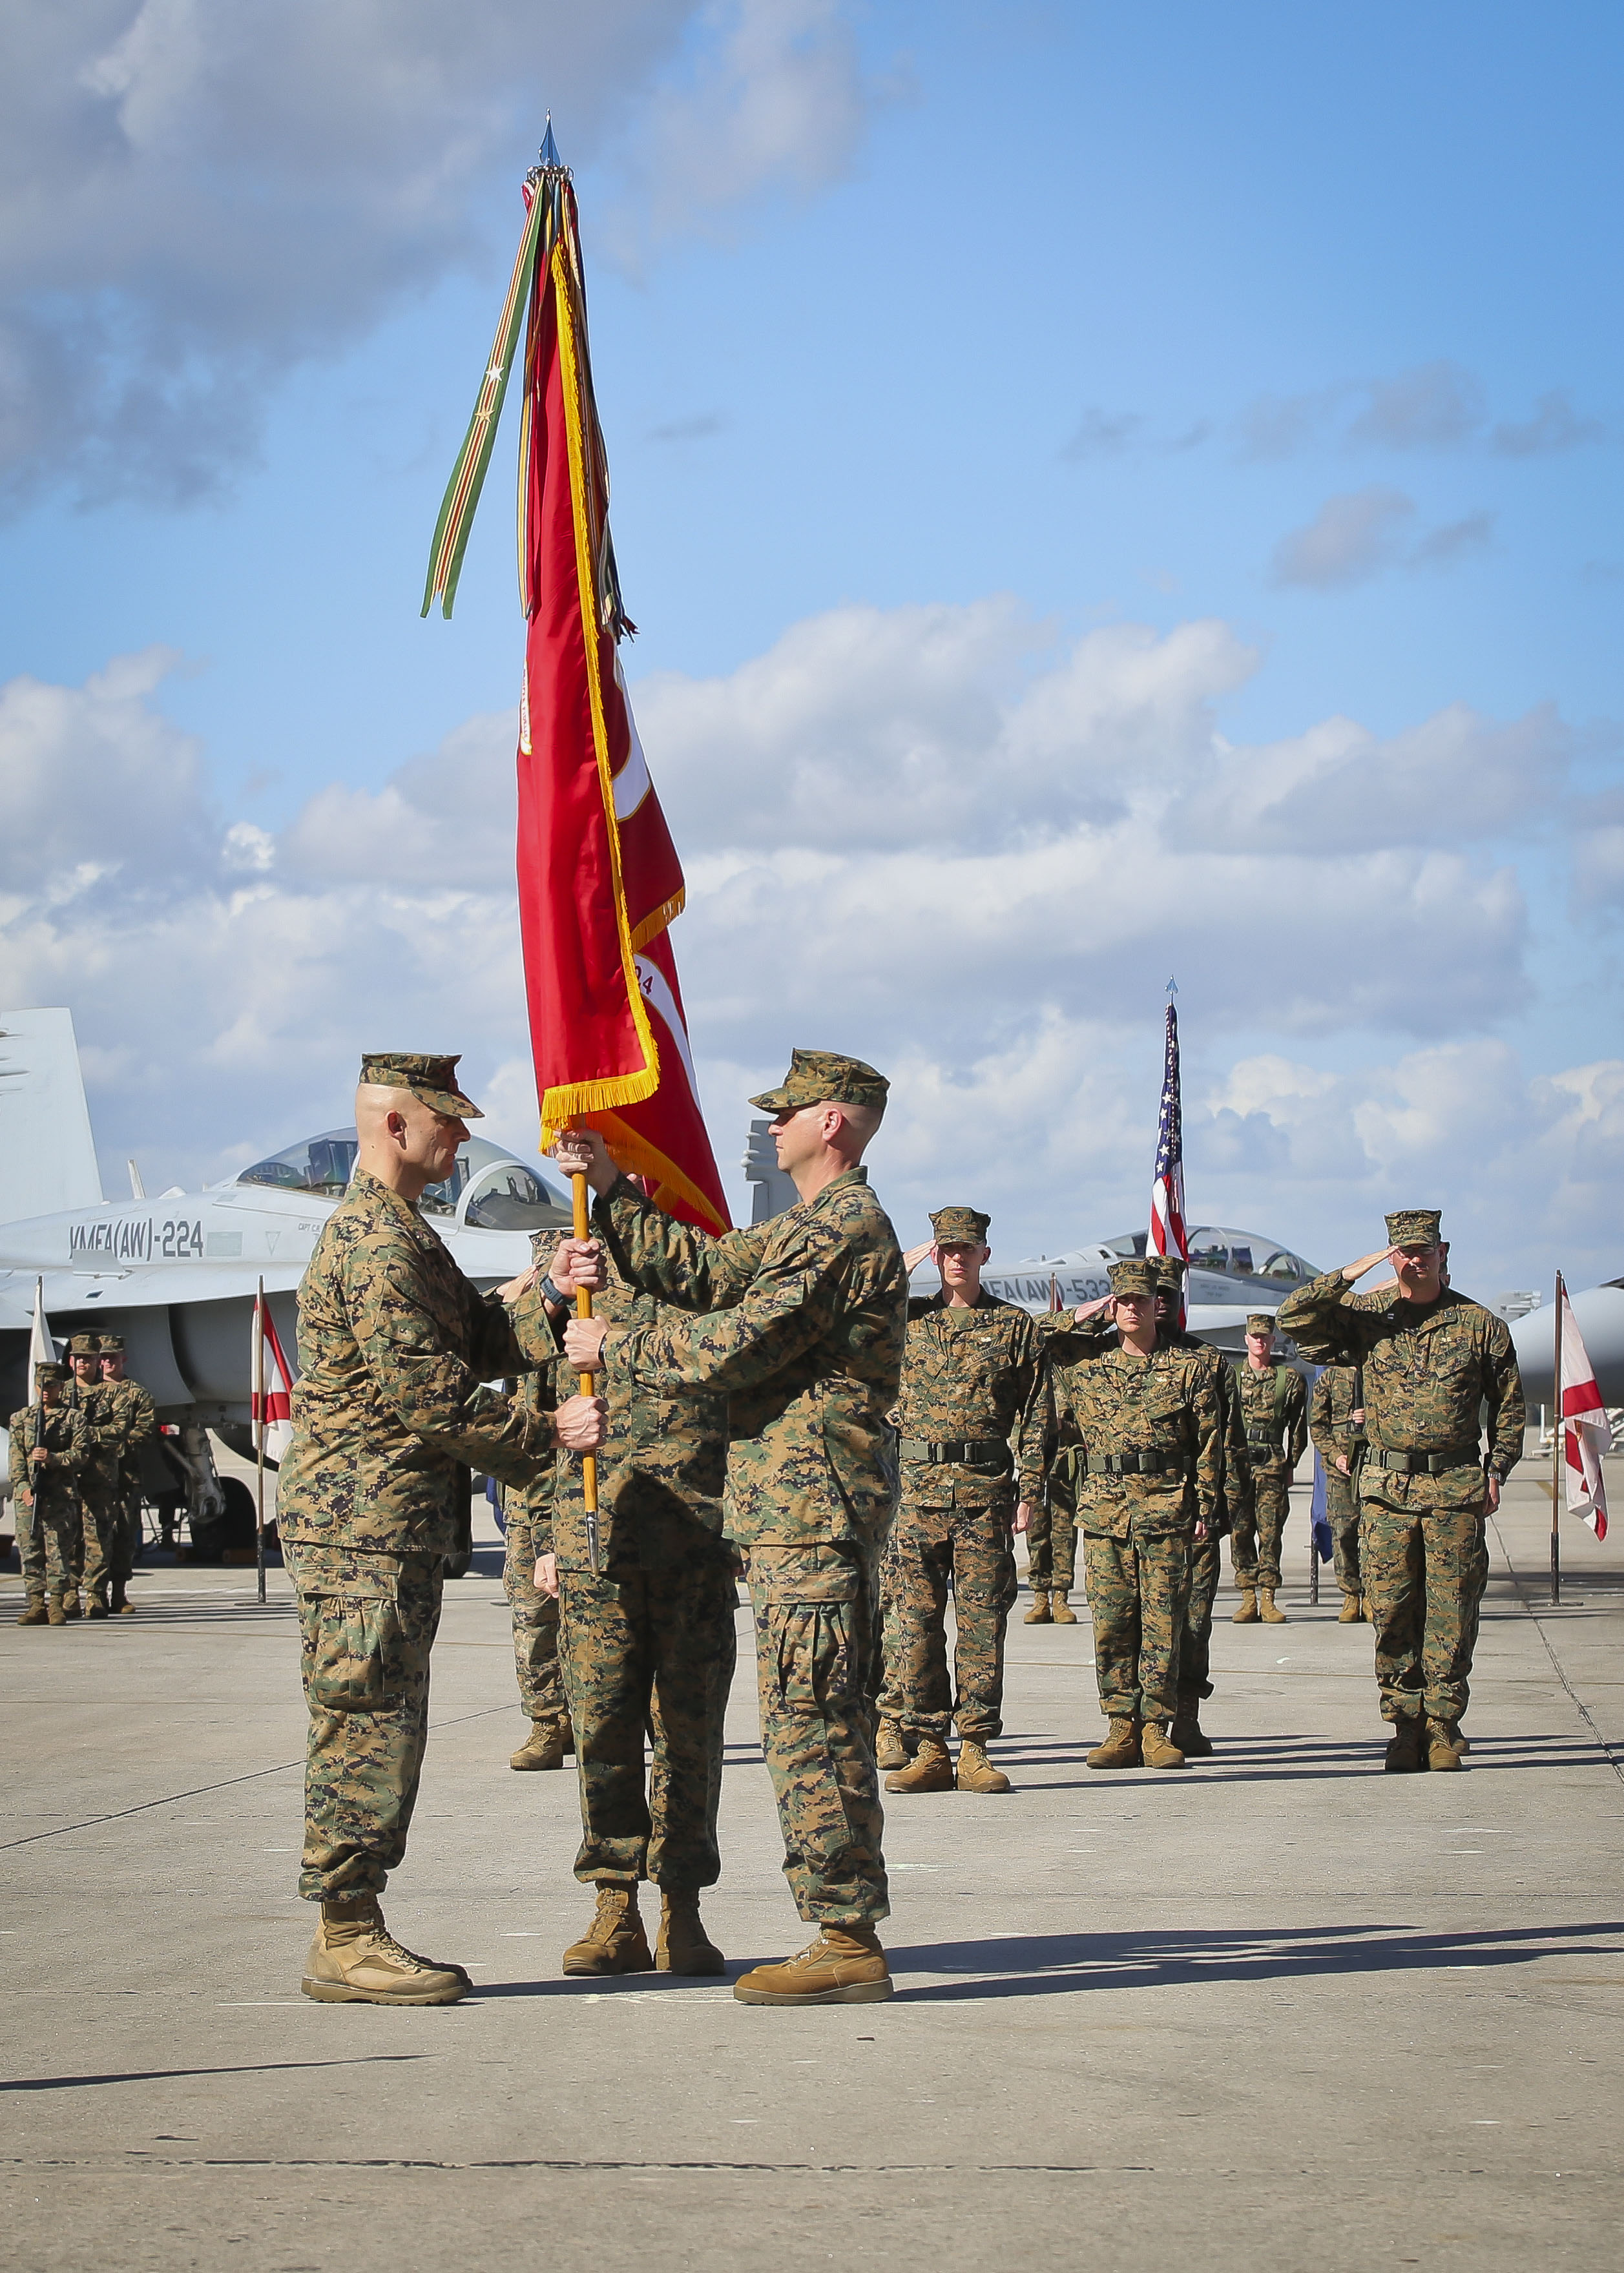 Vmfaaw 224 Welcomes New Commander Marine Corps Air Station Beaufort